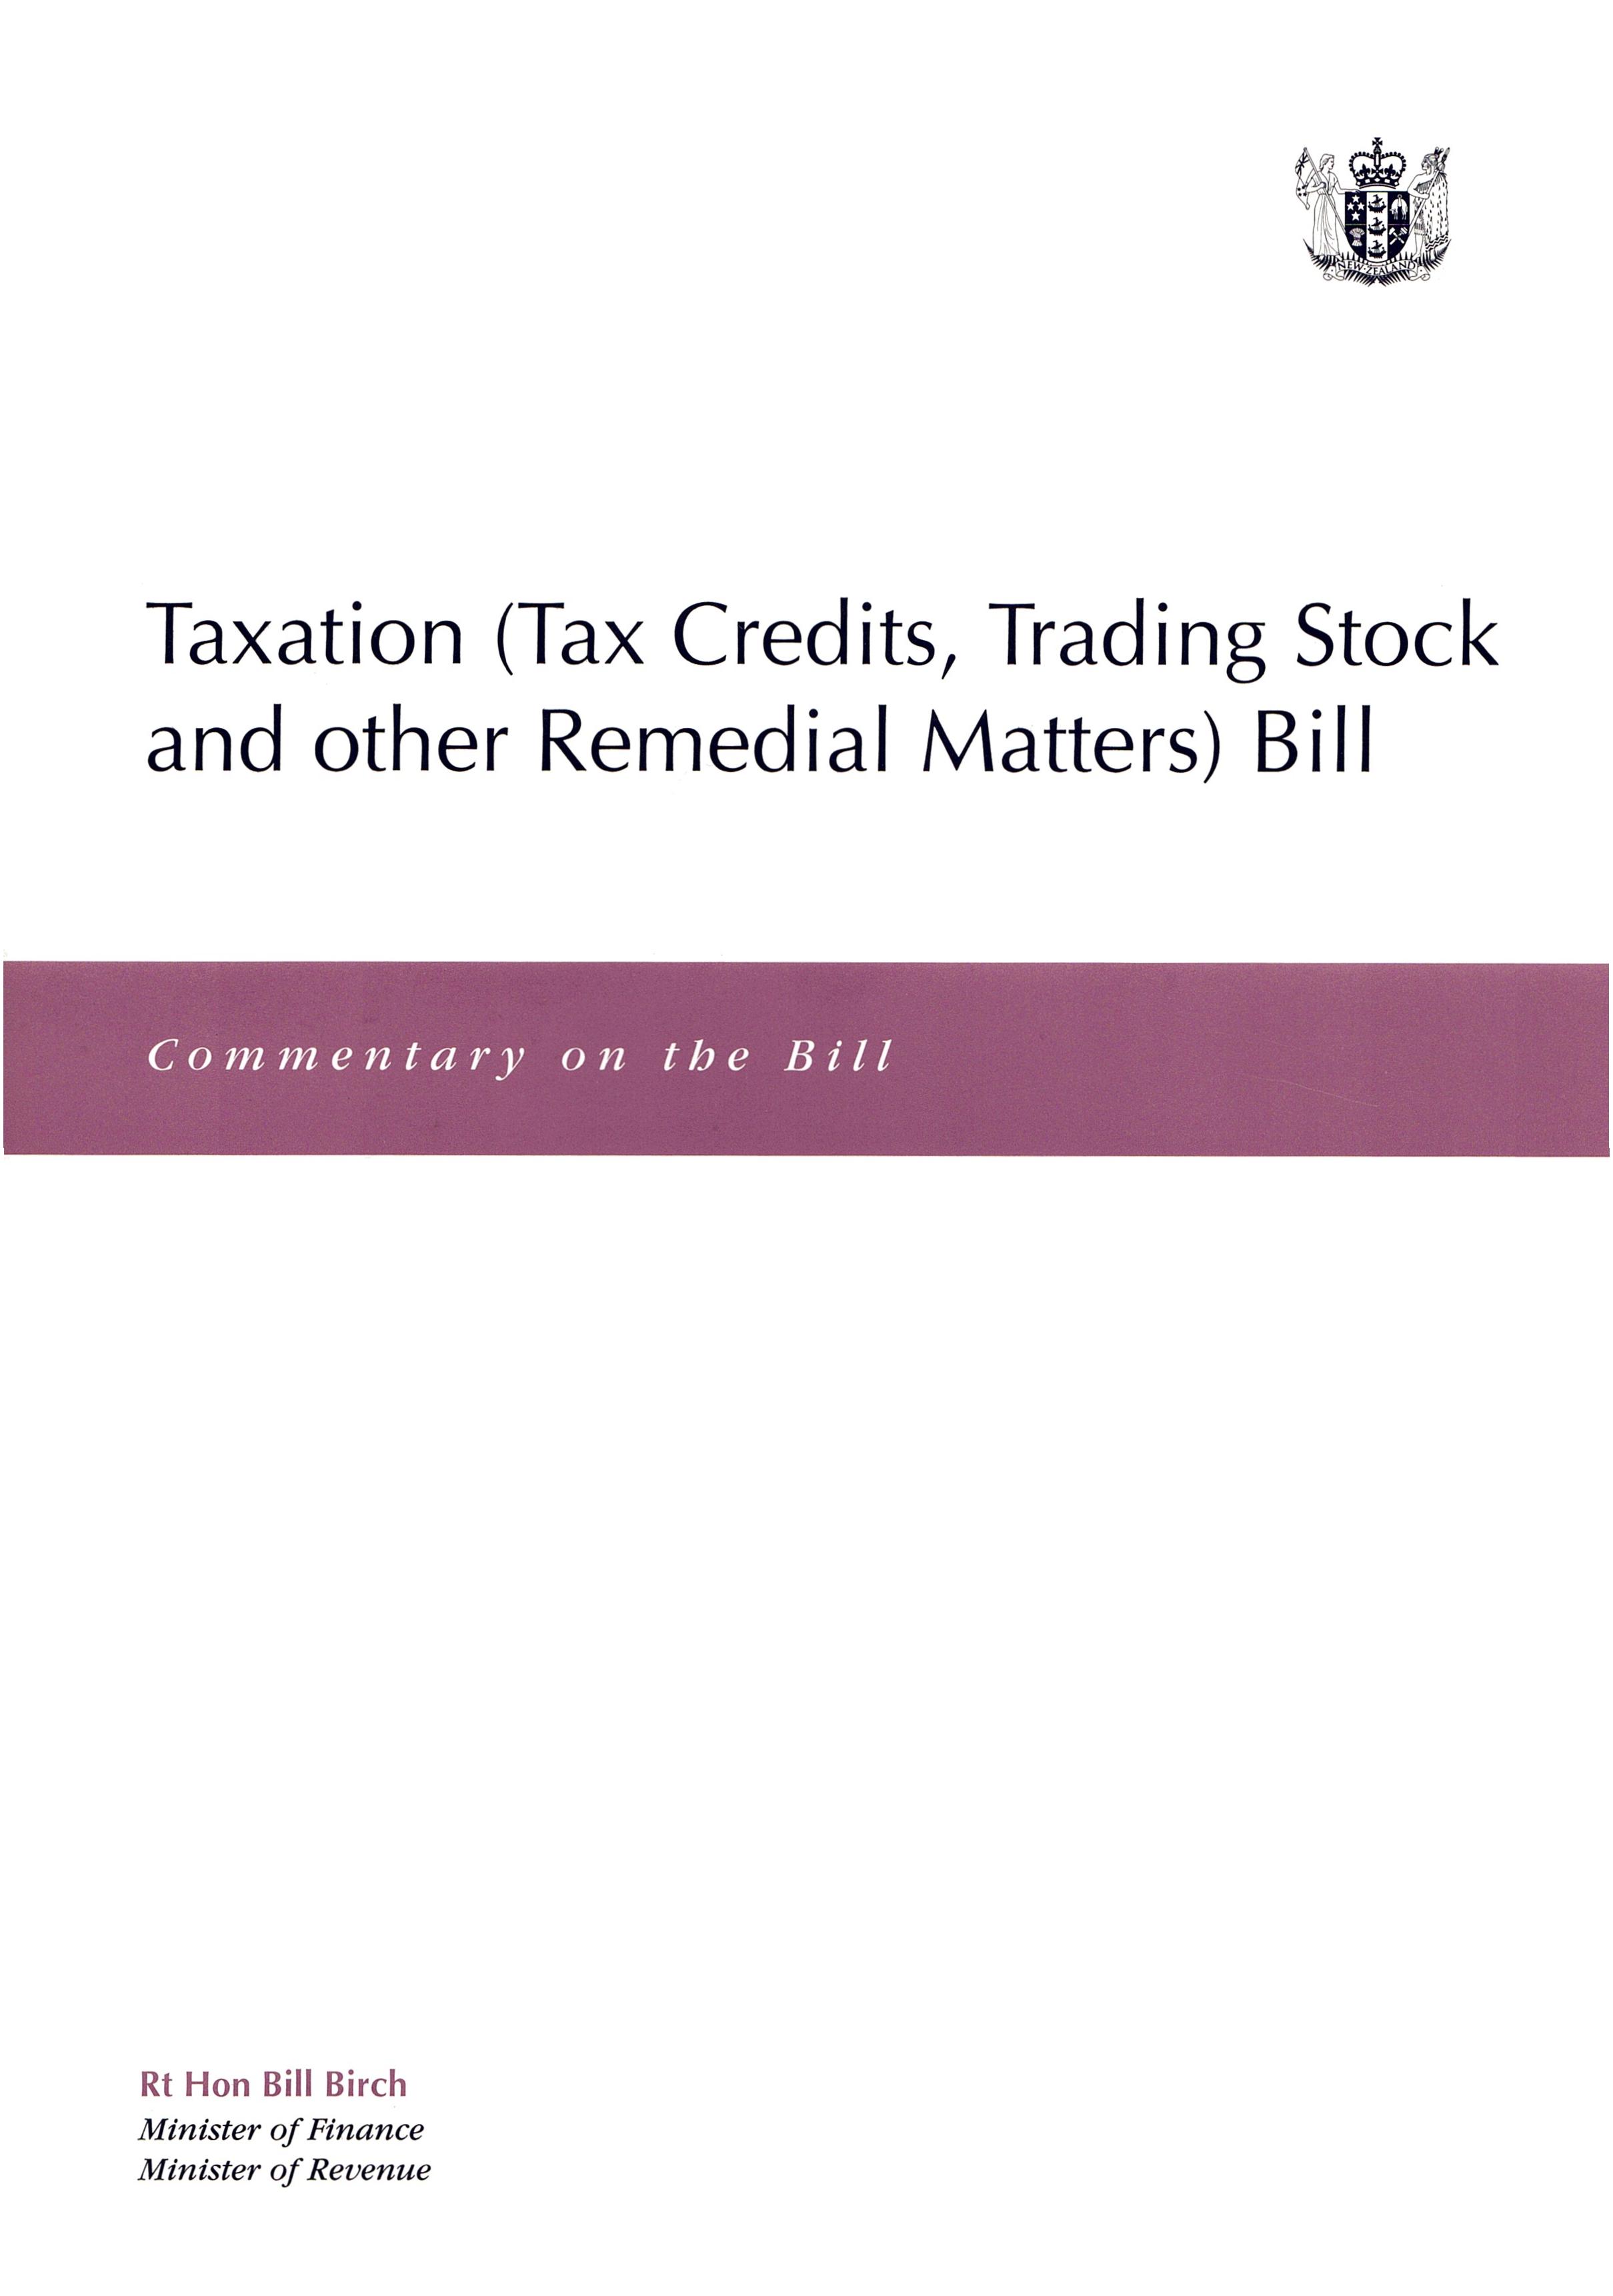 Publication cover image. Title = Taxation (Tax Credits, Trading Stock and Other Remedial Matters) Bill Commentary on the Bill. March 1998.